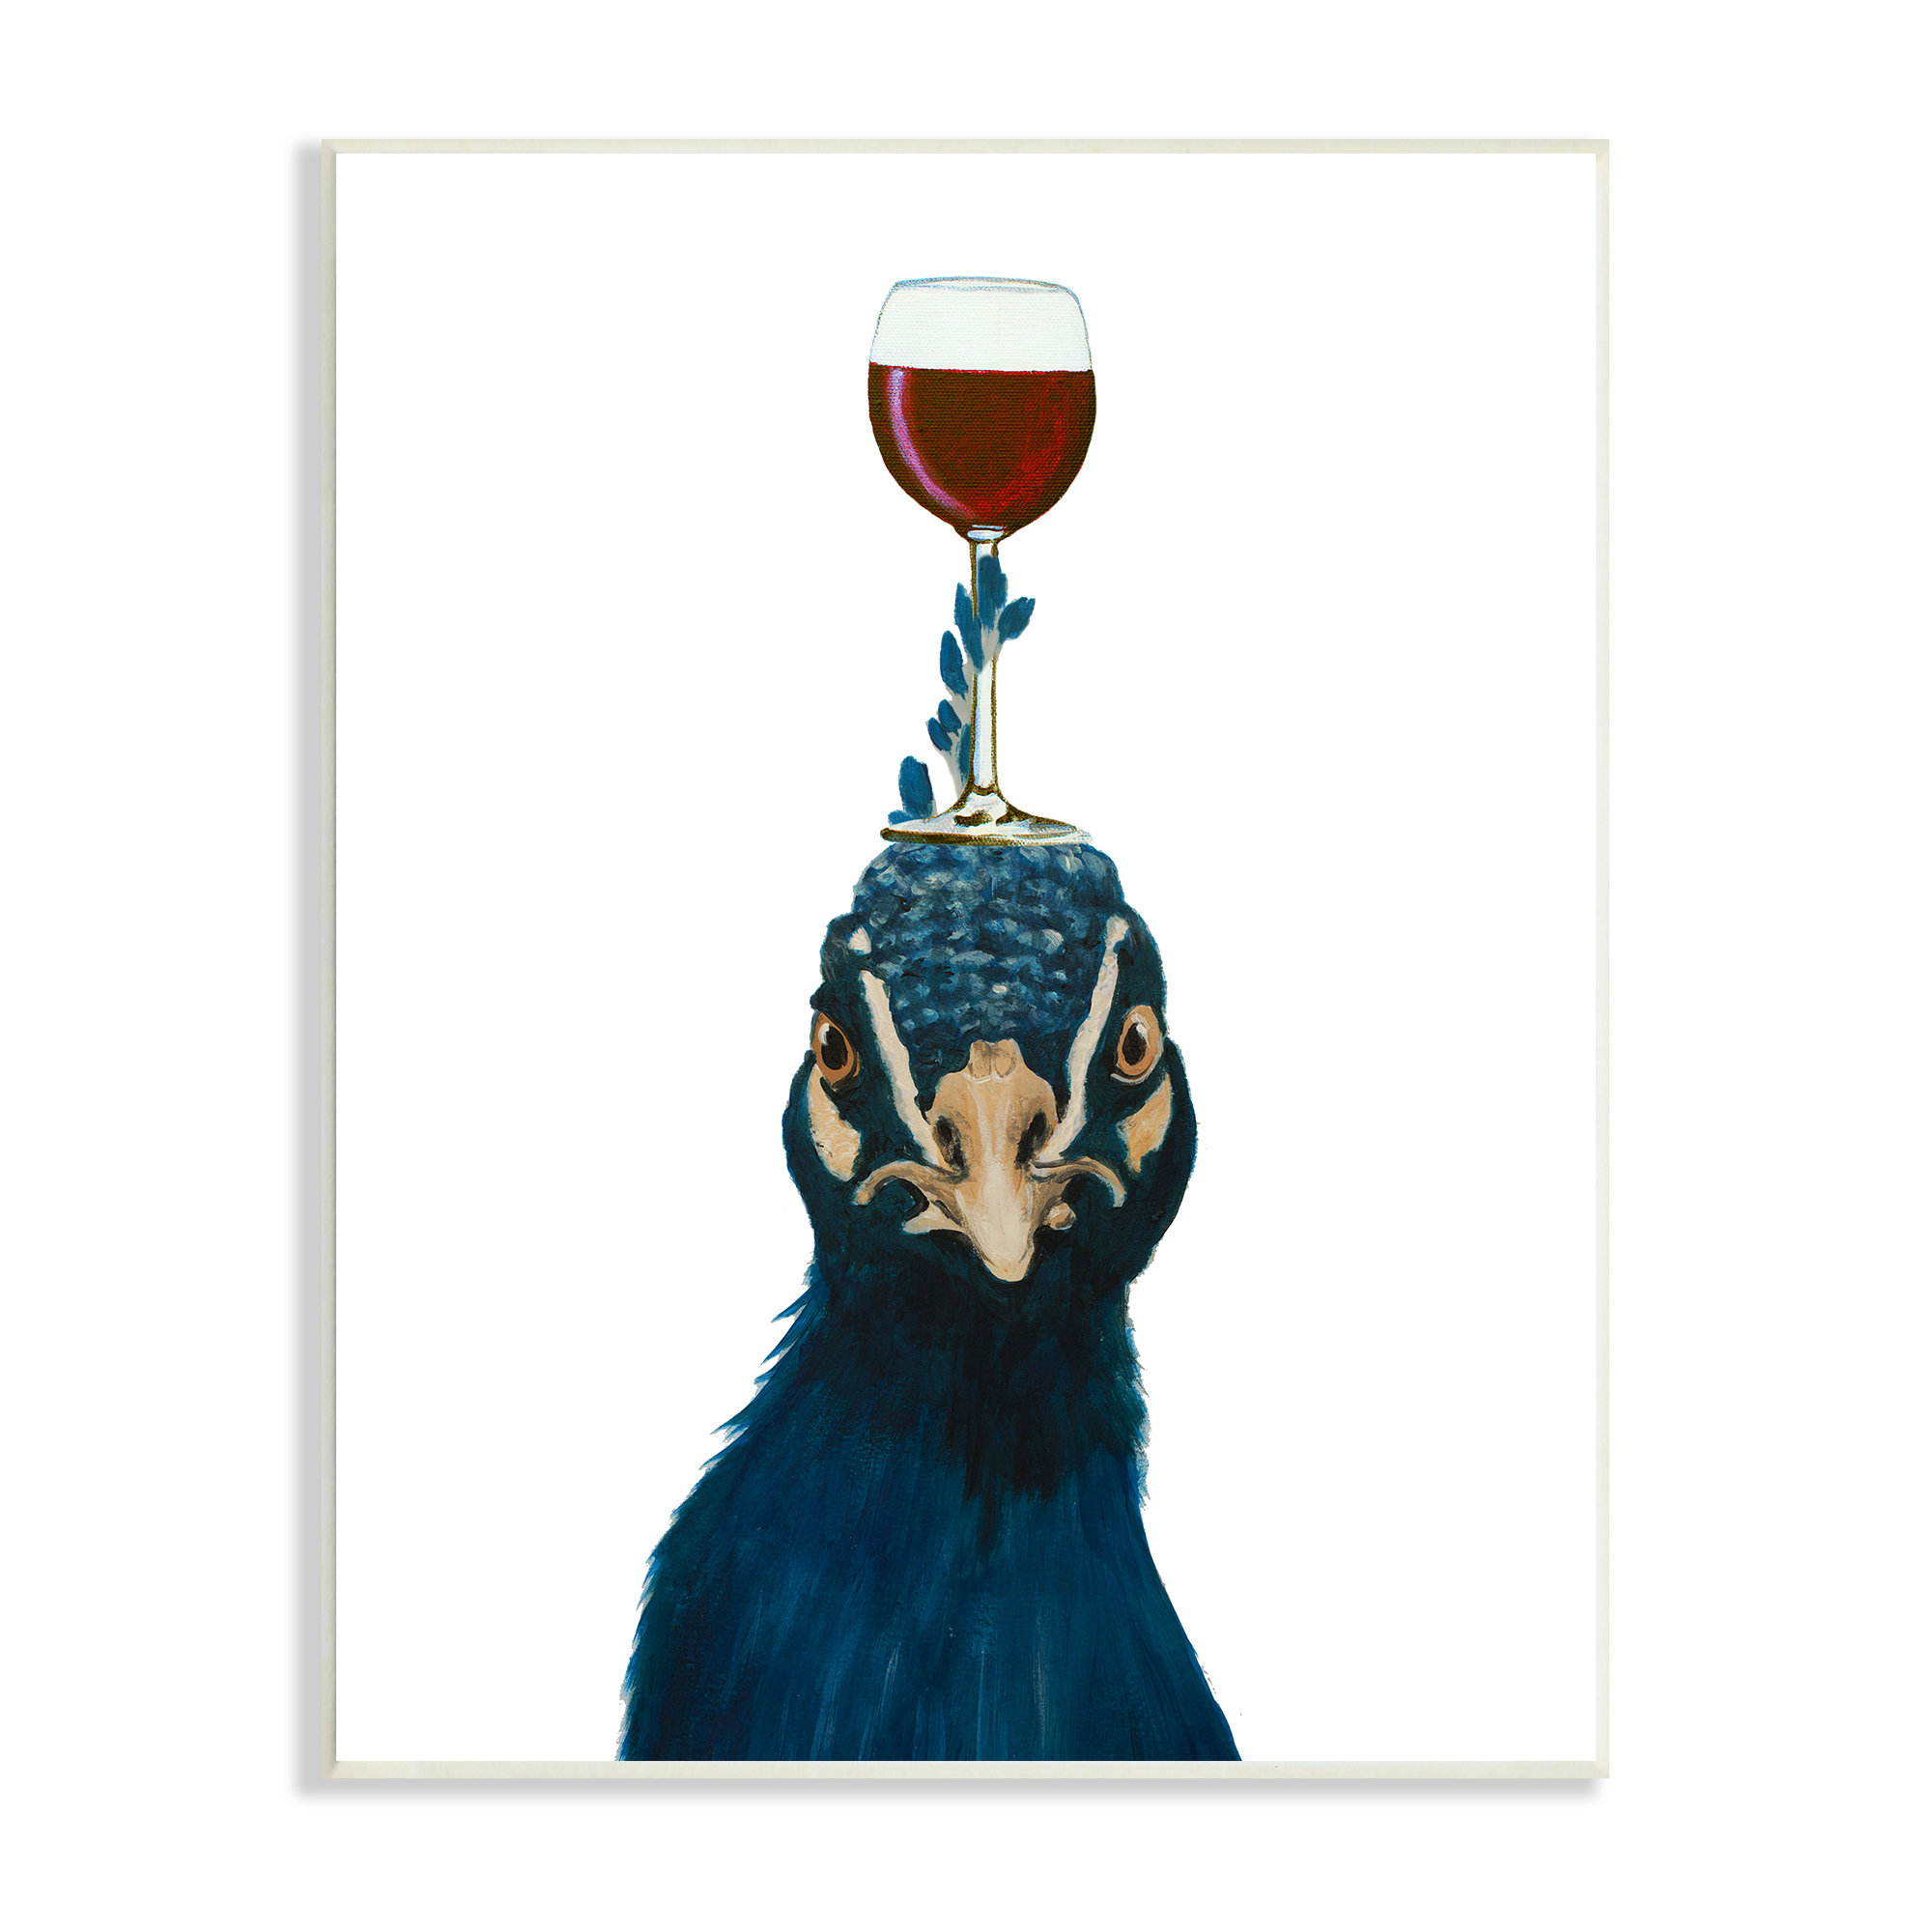 Quirky Blue Peacock Balancing Wine Glass on Head by Coco de Paris - Painting Stupell Industries Format: White Framed, Size: 14 H x 11 W